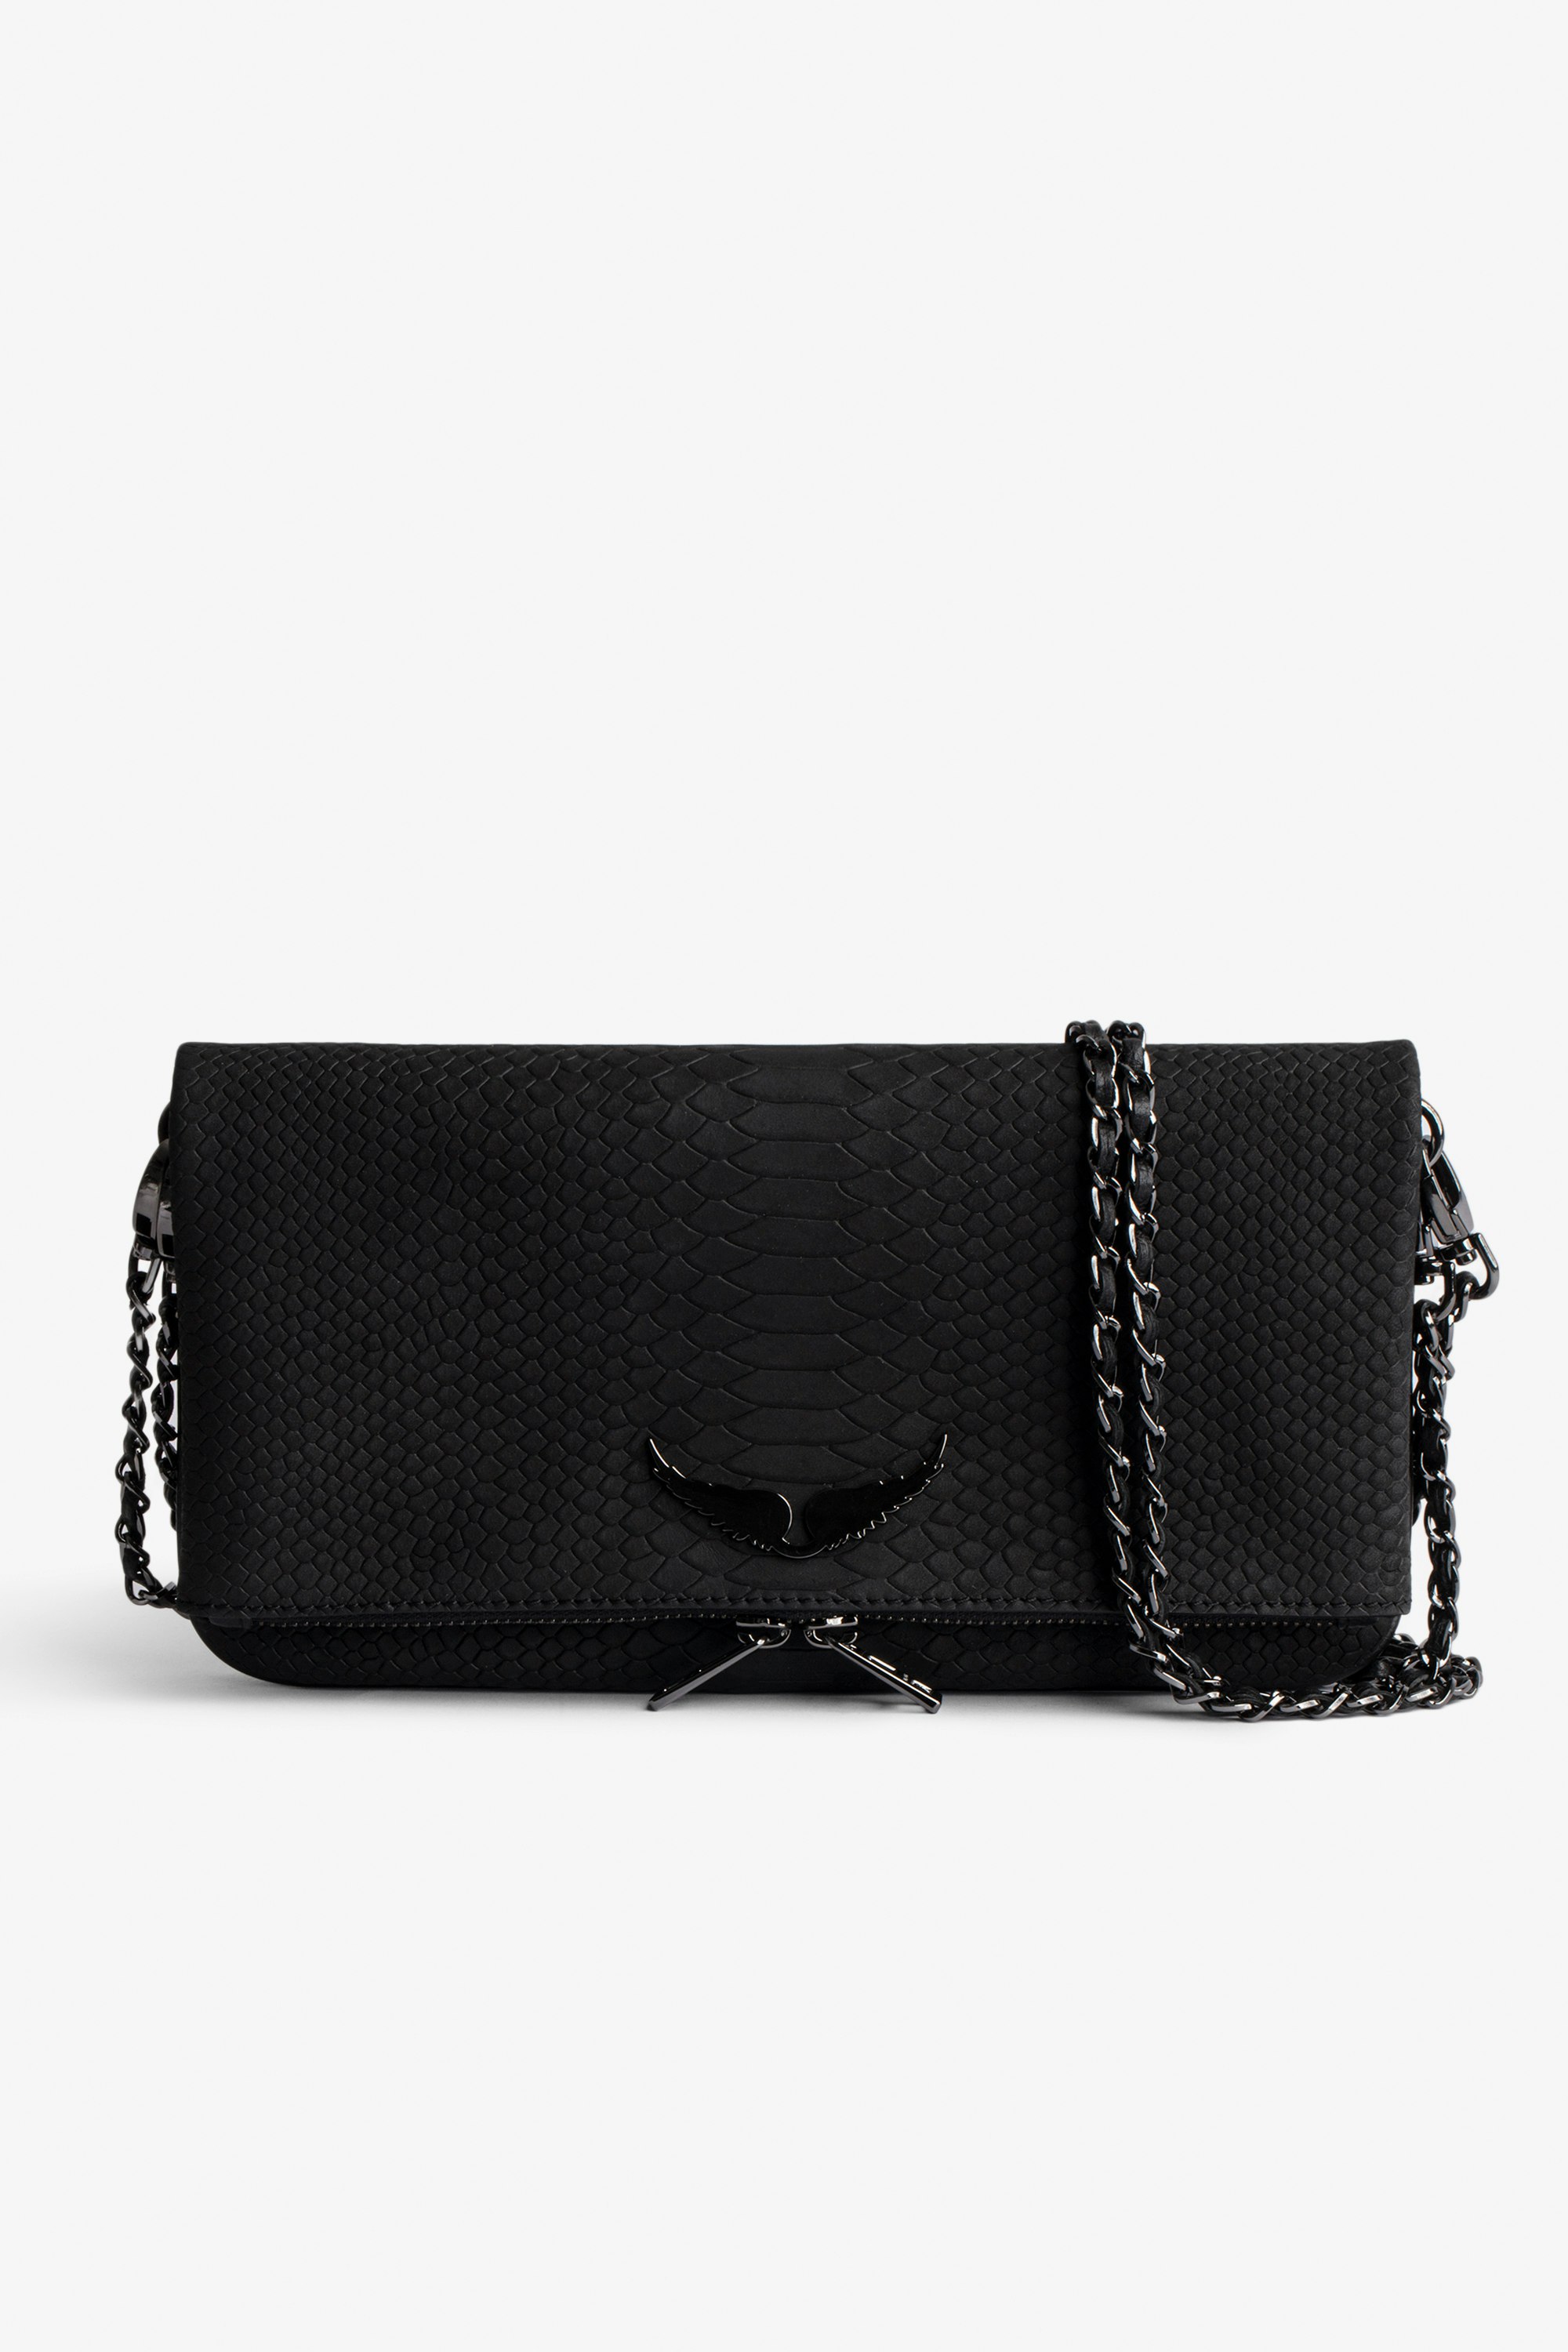 Soft Savage Rock Clutch Women’s clutch in black python-effect leather with double leather-and-metal chain